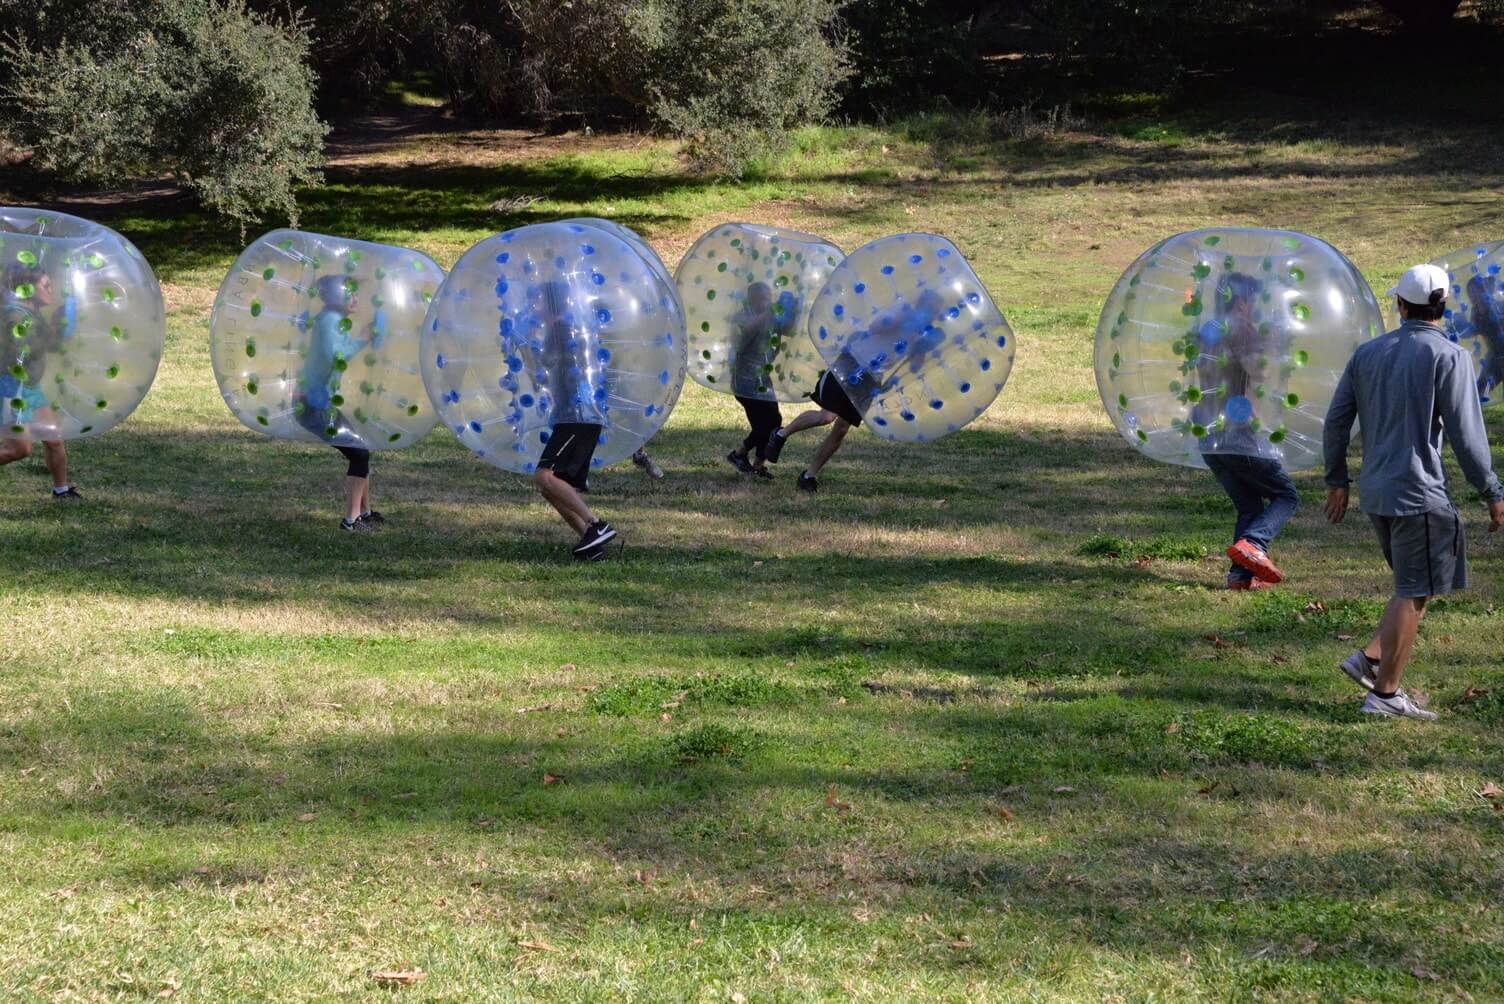 Player in Bubble Suit Bumped and on the Ground